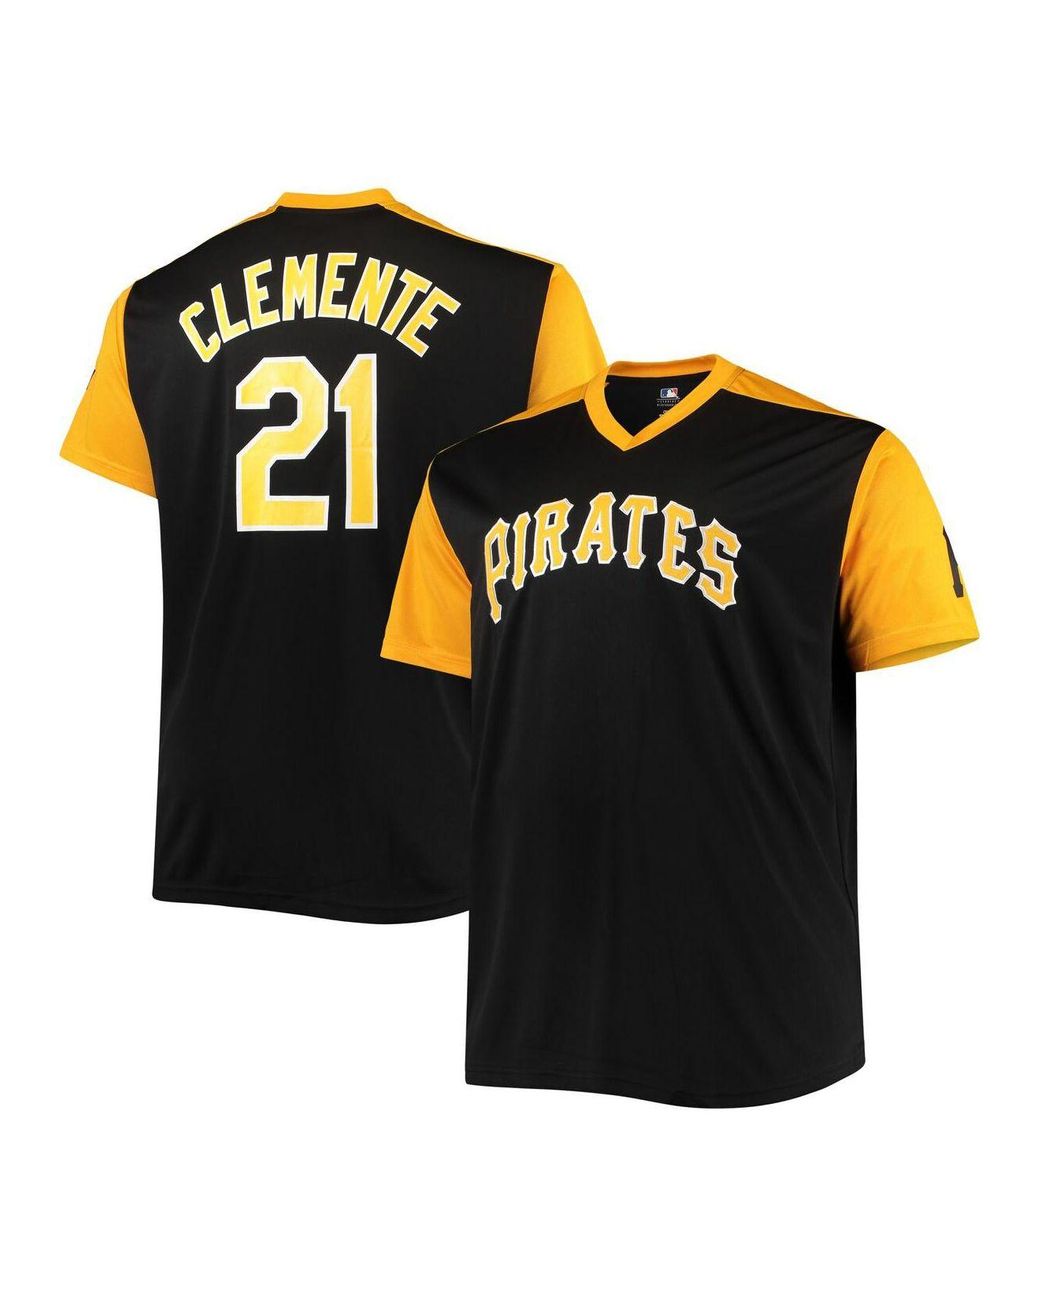 Profile Roberto Clemente Black, Gold Pittsburgh Pirates Cooperstown  Collection Player Replica Jersey for Men